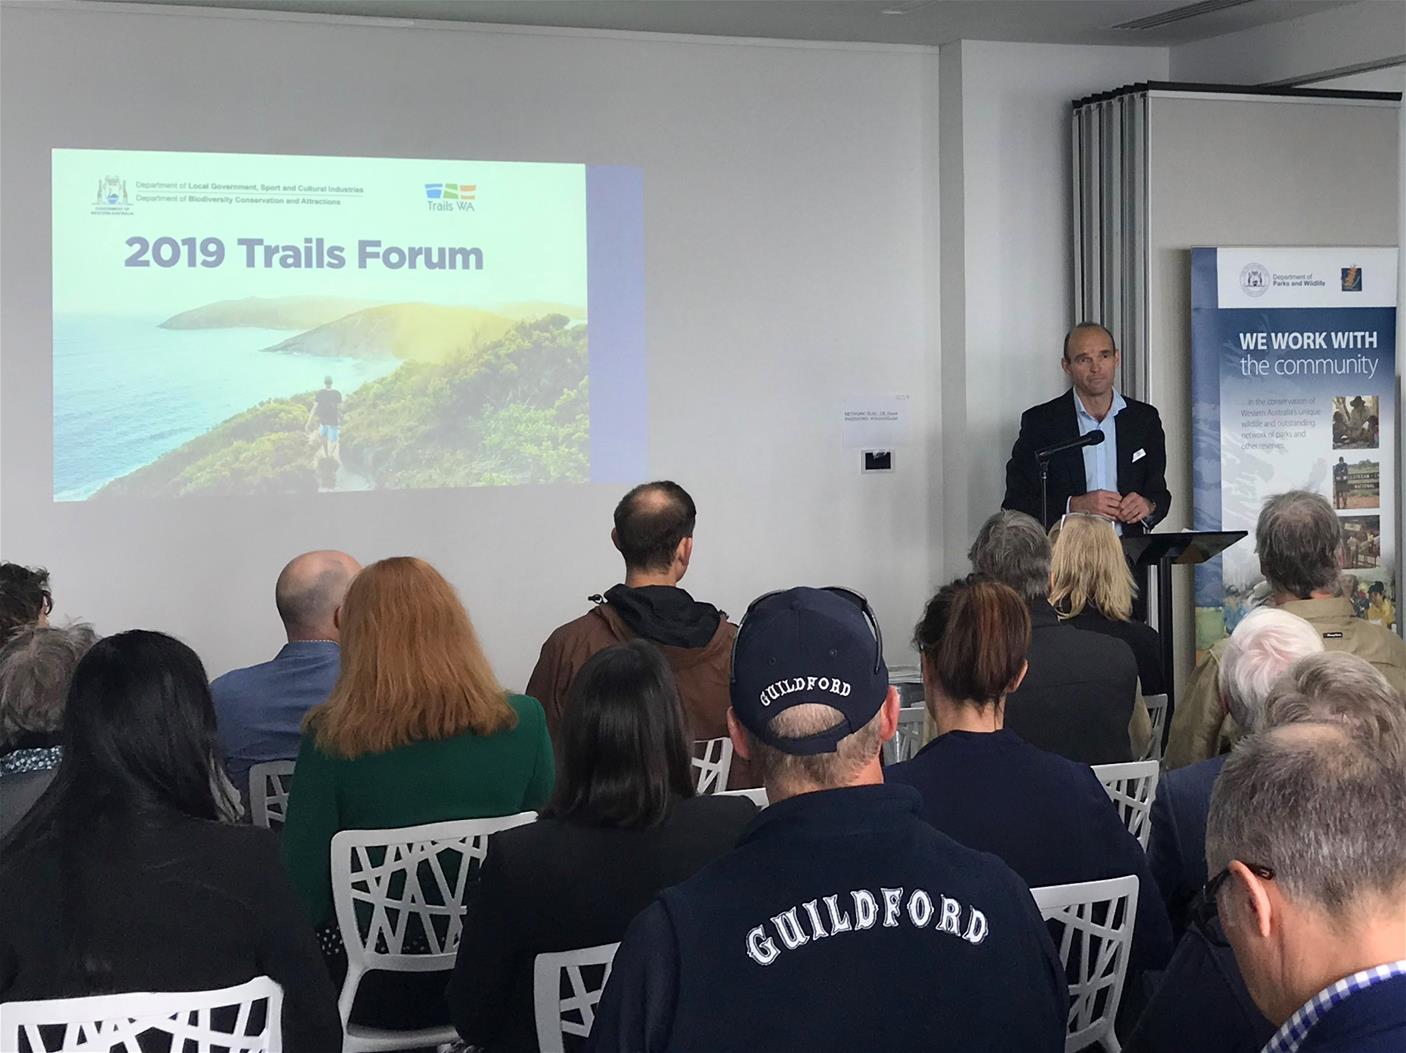 Tim Swart at the 2019 Trails Forum